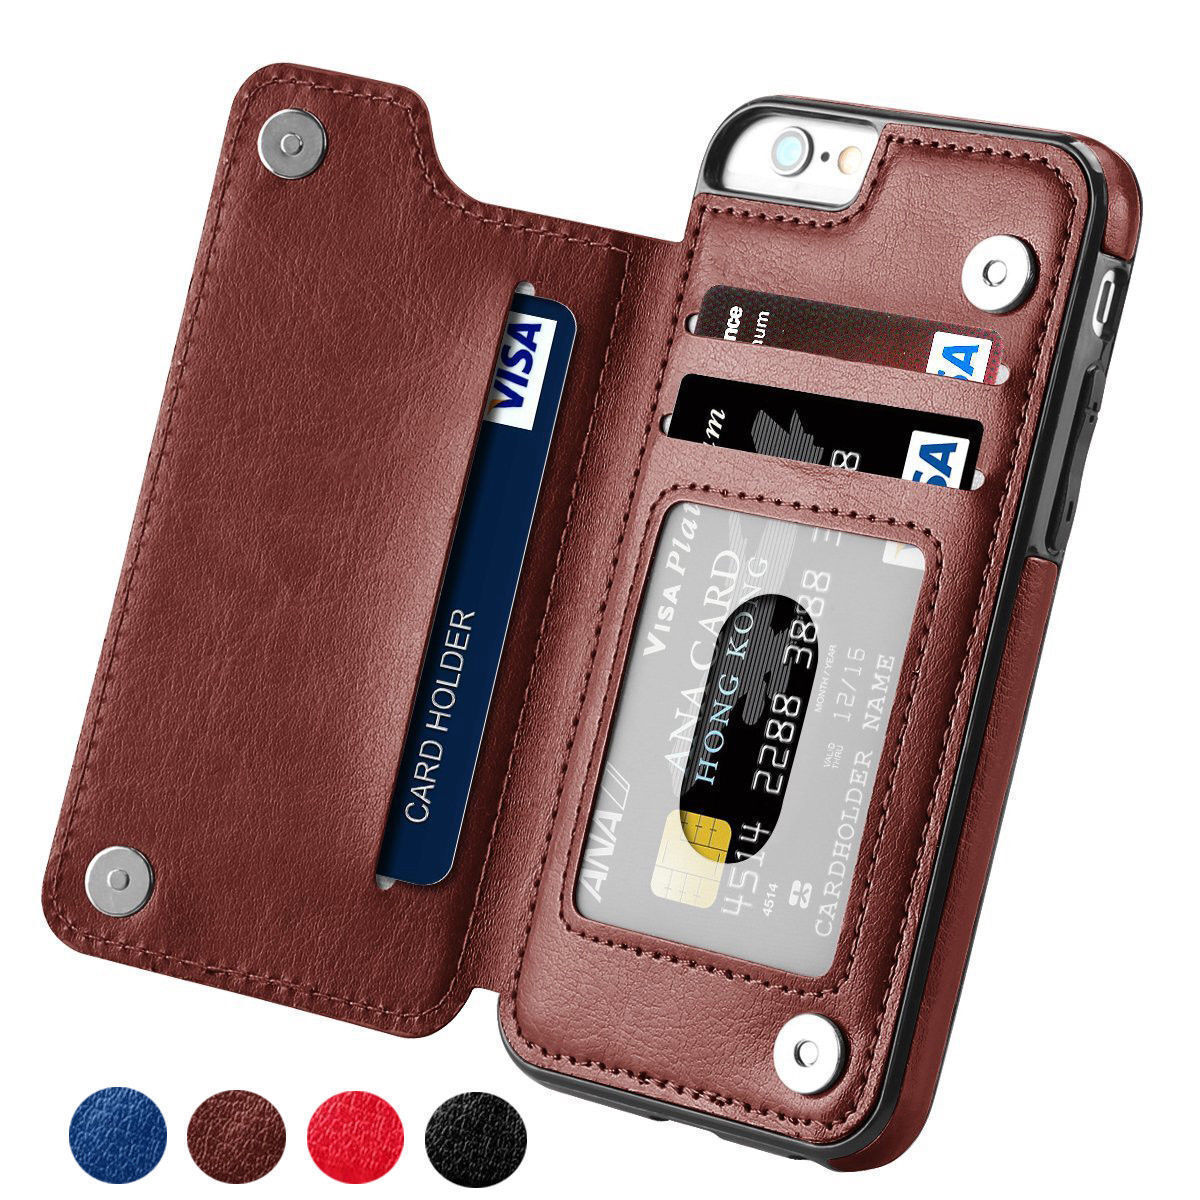 For iPhone X XS Max 8/7 Samsung S9+ Note 9 Leather Wallet Card Slot Flip Case Dooqi Does Not Apply